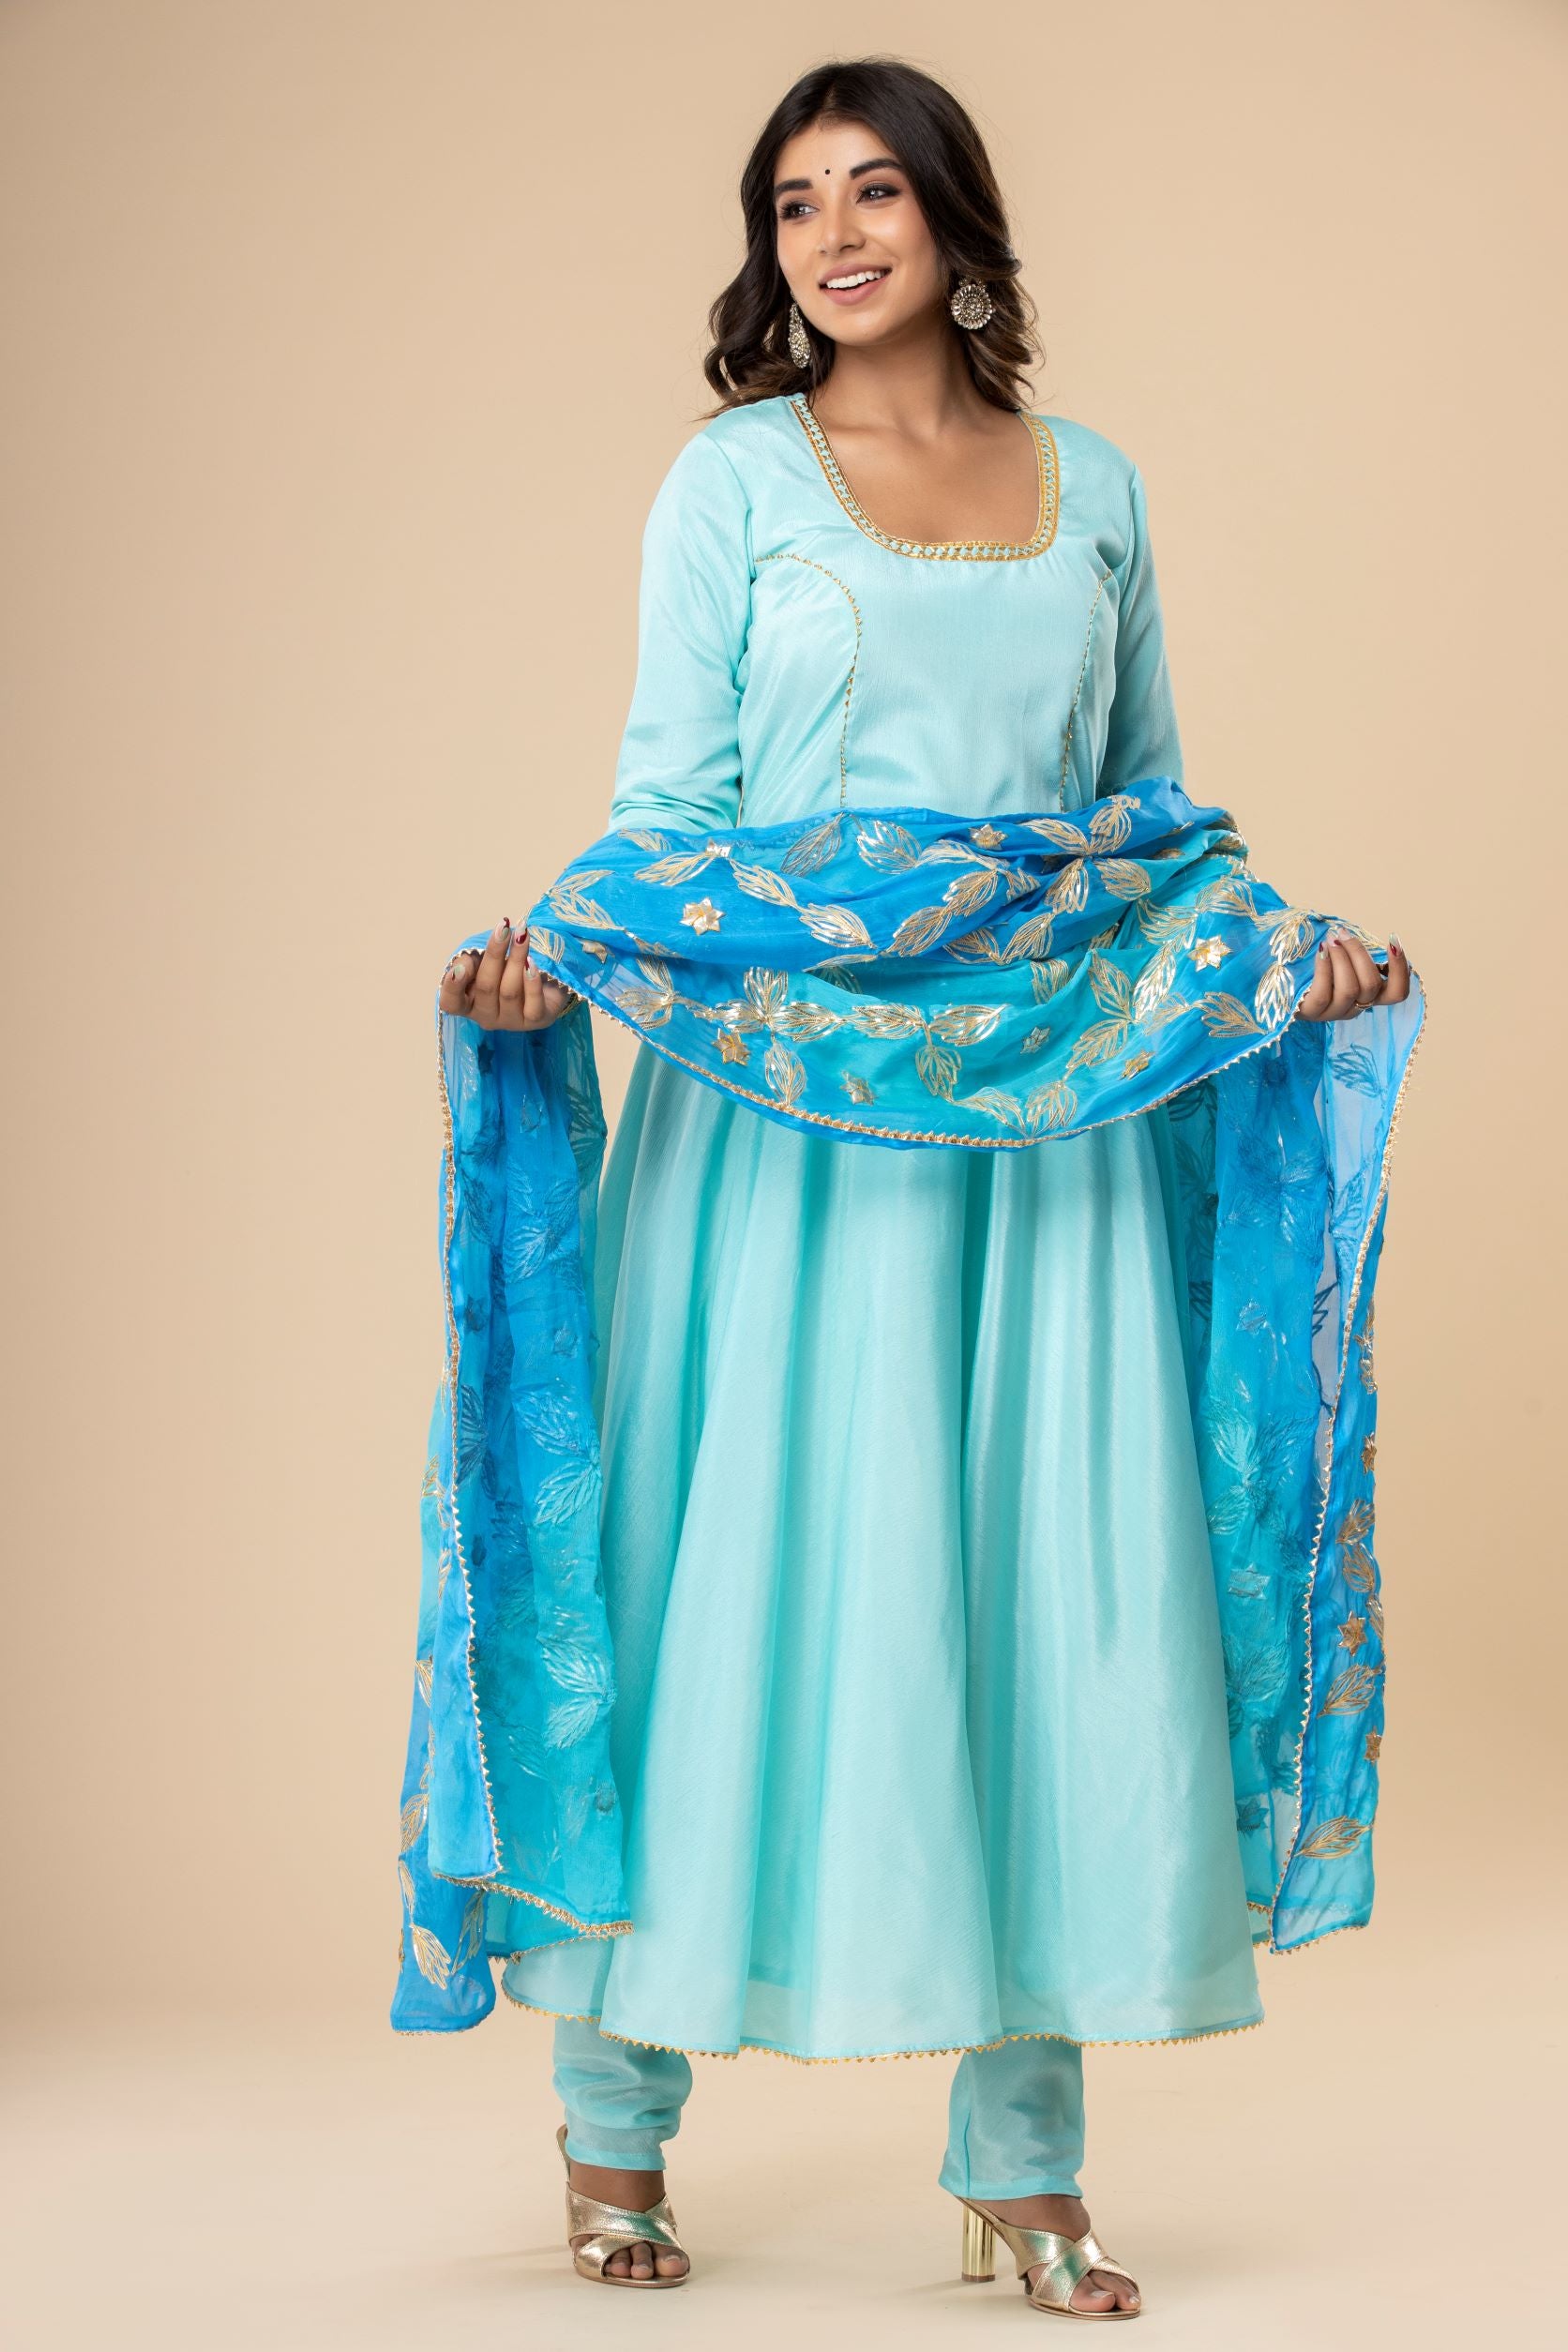 Elegant Sky Blue Long Anarkali Suit For You To Carry This Festive Season